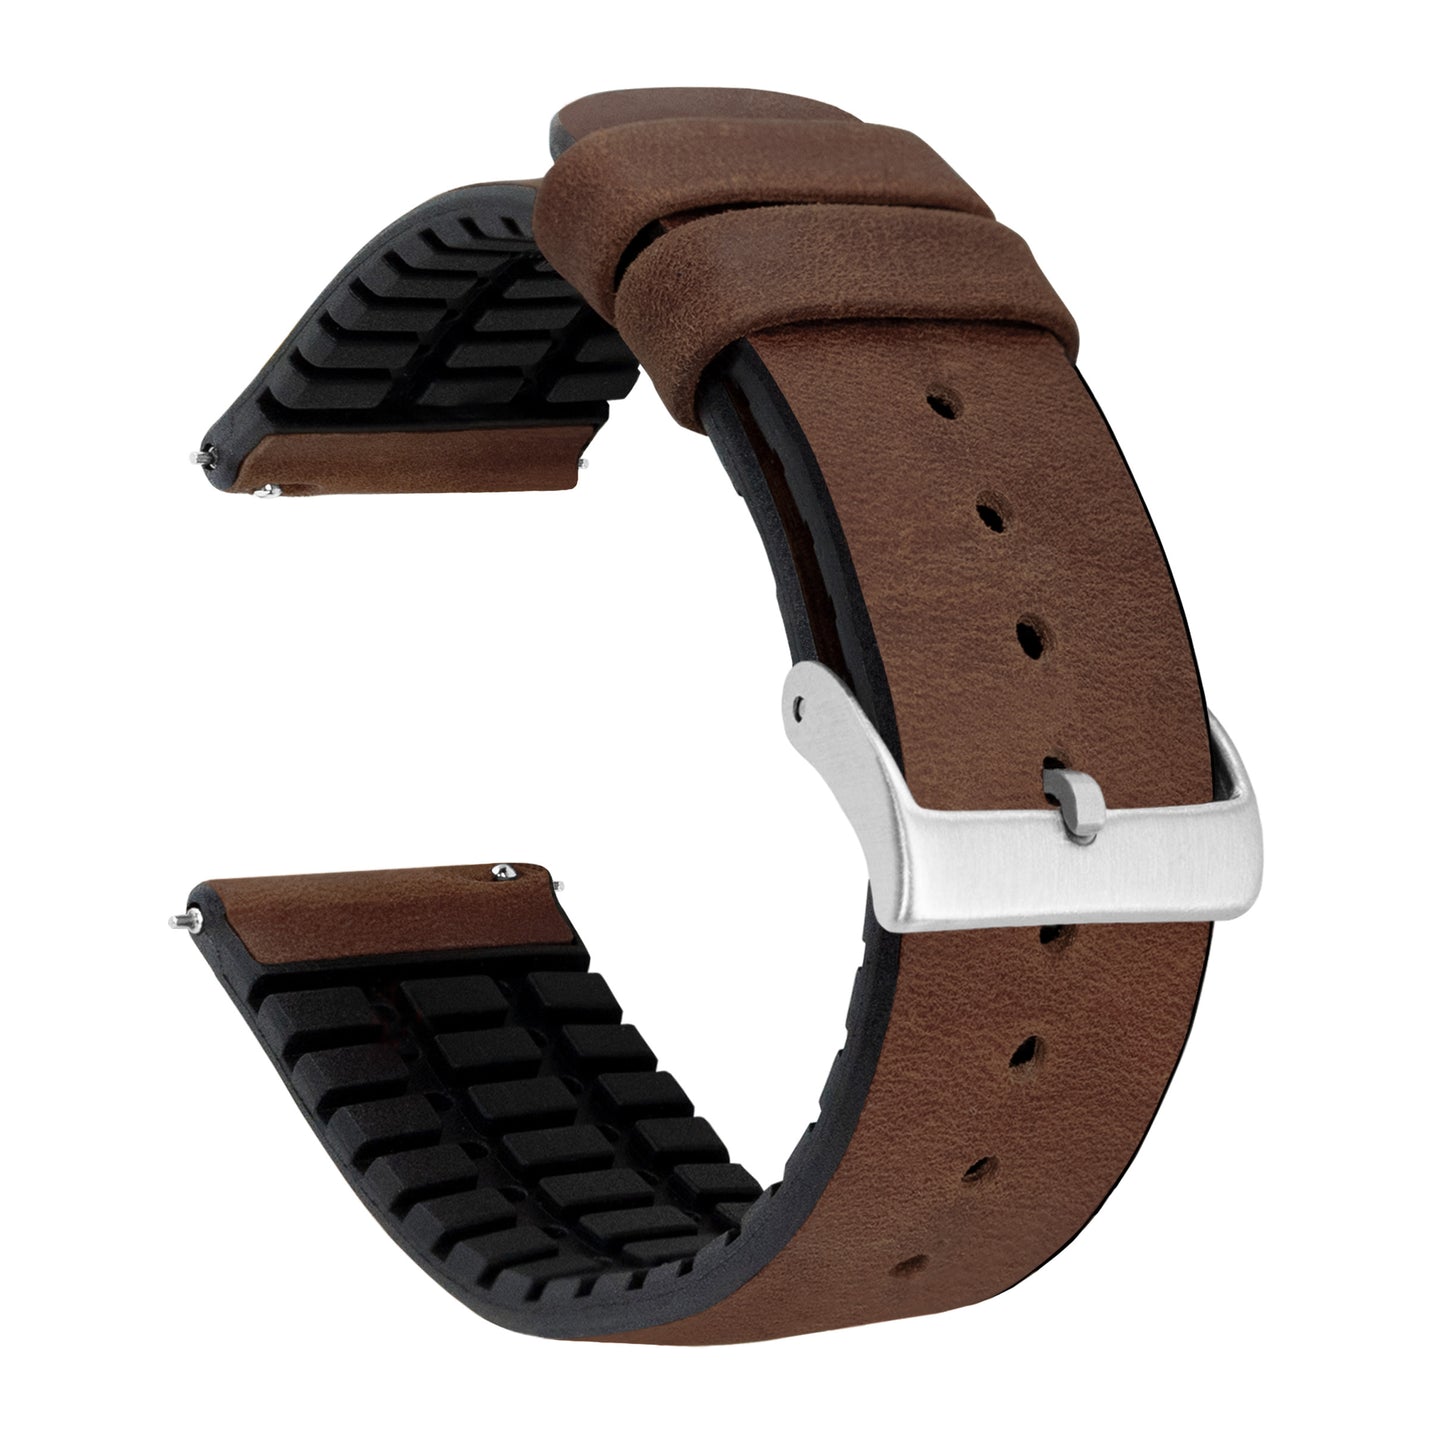 Moto 360 Gen2 | Leather and Rubber Hybrid | Walnut Brown - Barton Watch Bands